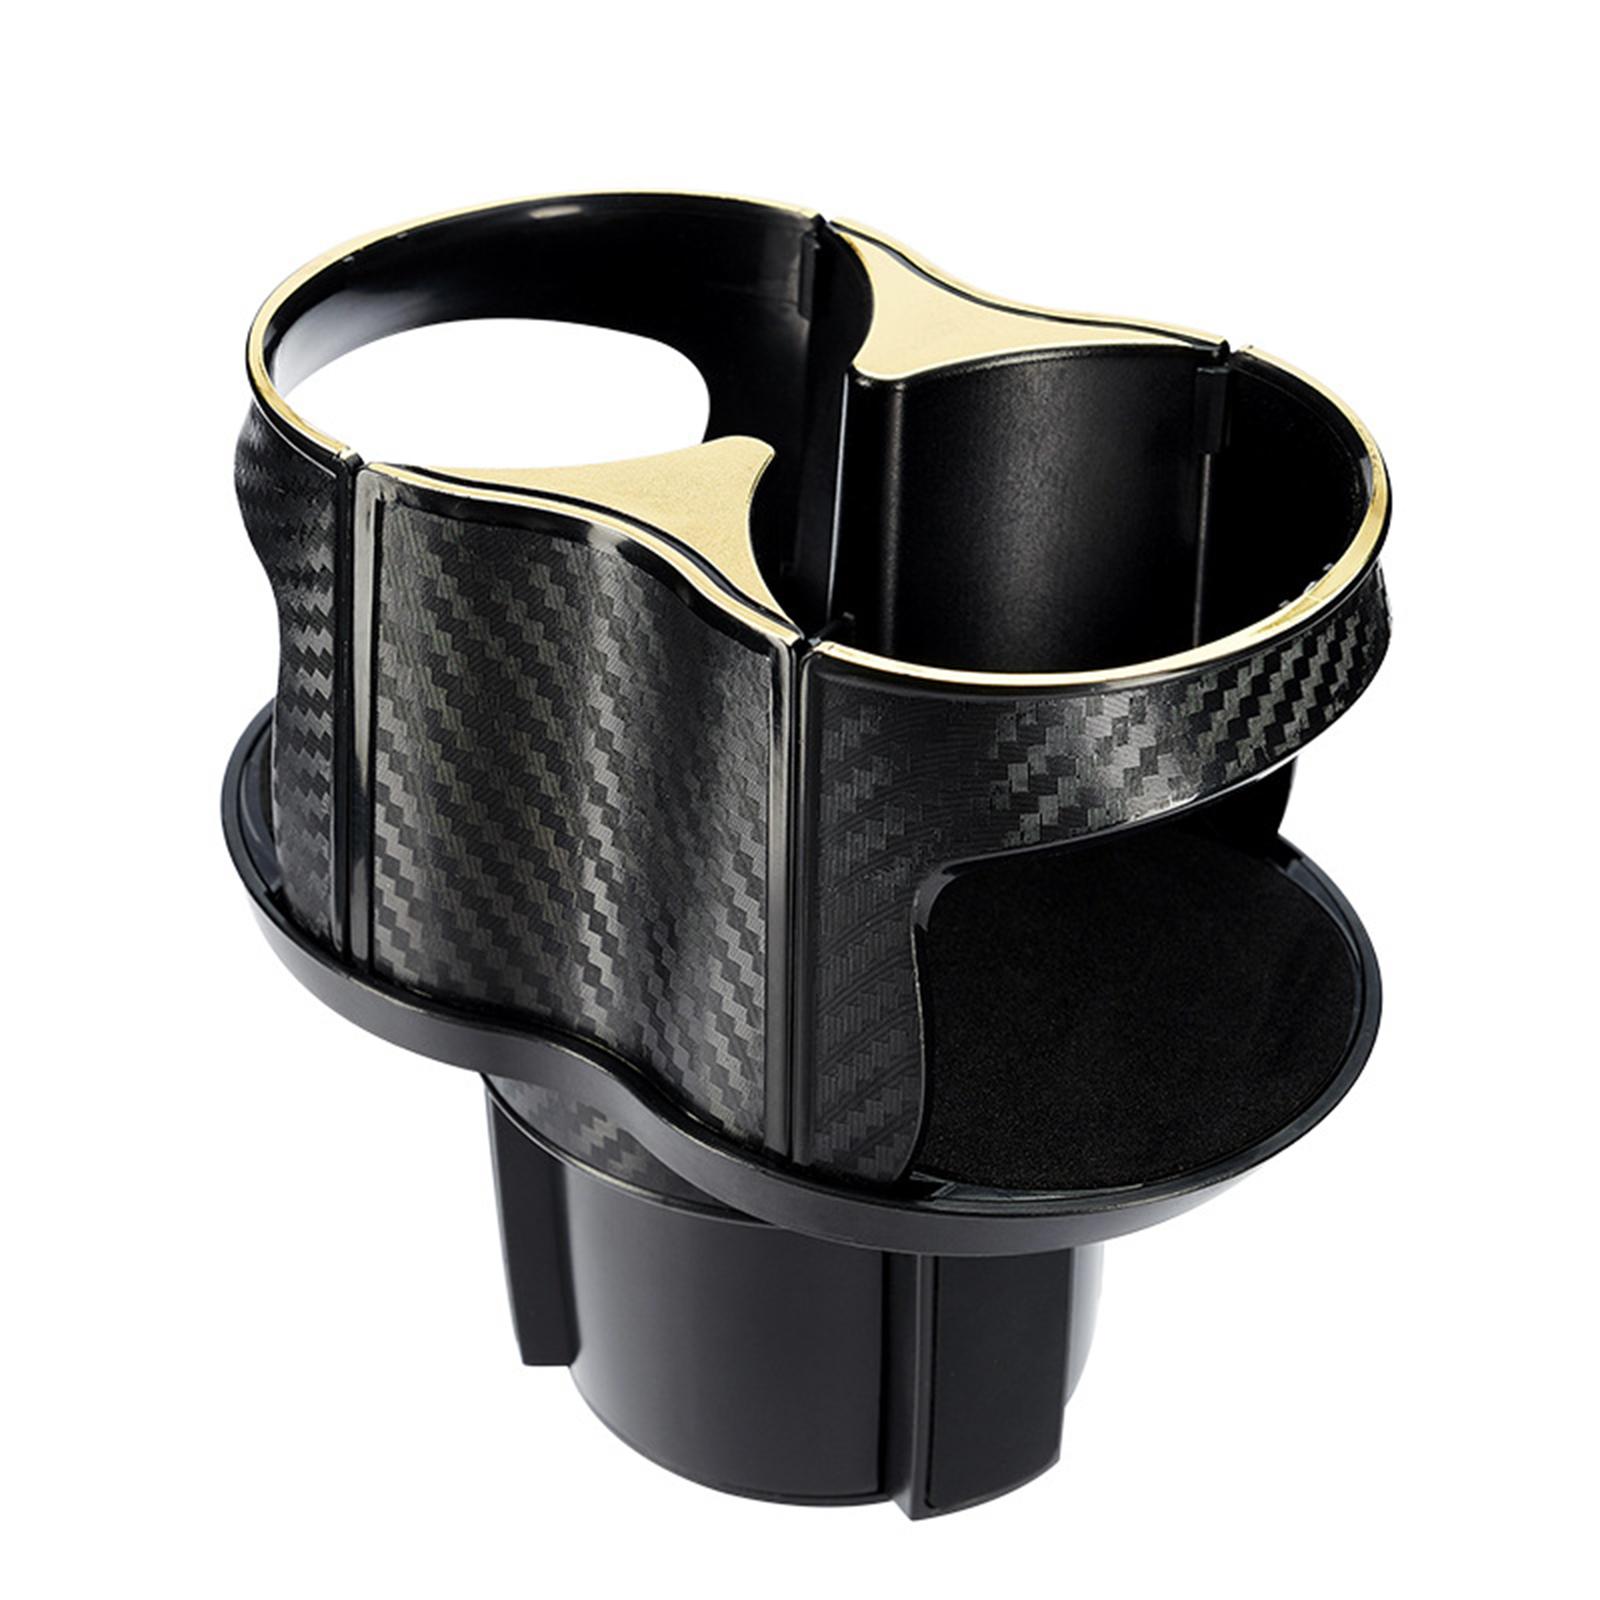 Car Cup Holder 2 in 1 Multifunctional Auto Universal Drink Holder Organizers Carbon Gold